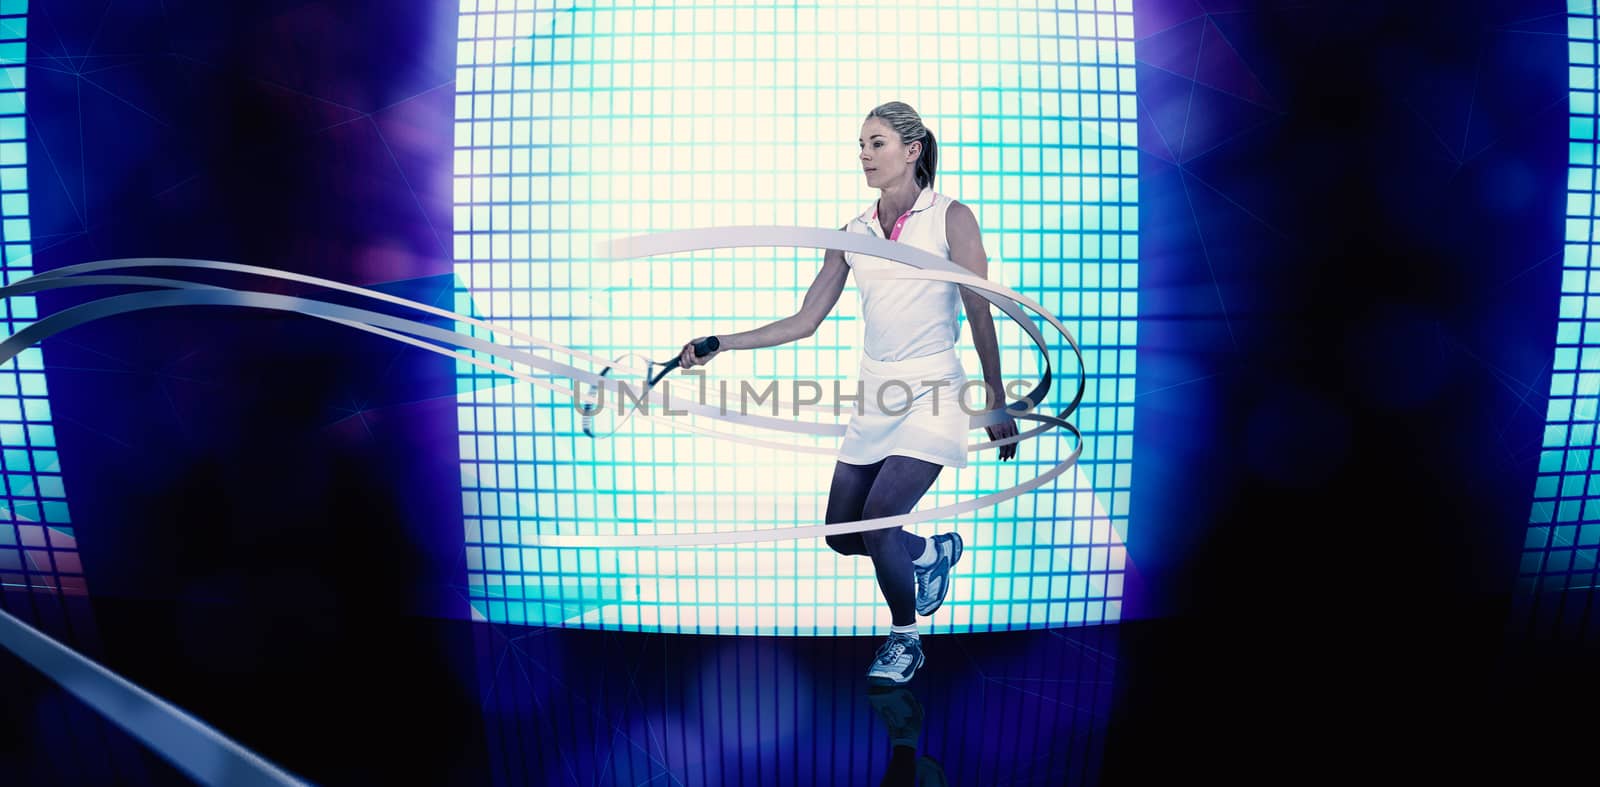 Athlete playing tennis with a racket  against background of blue squares